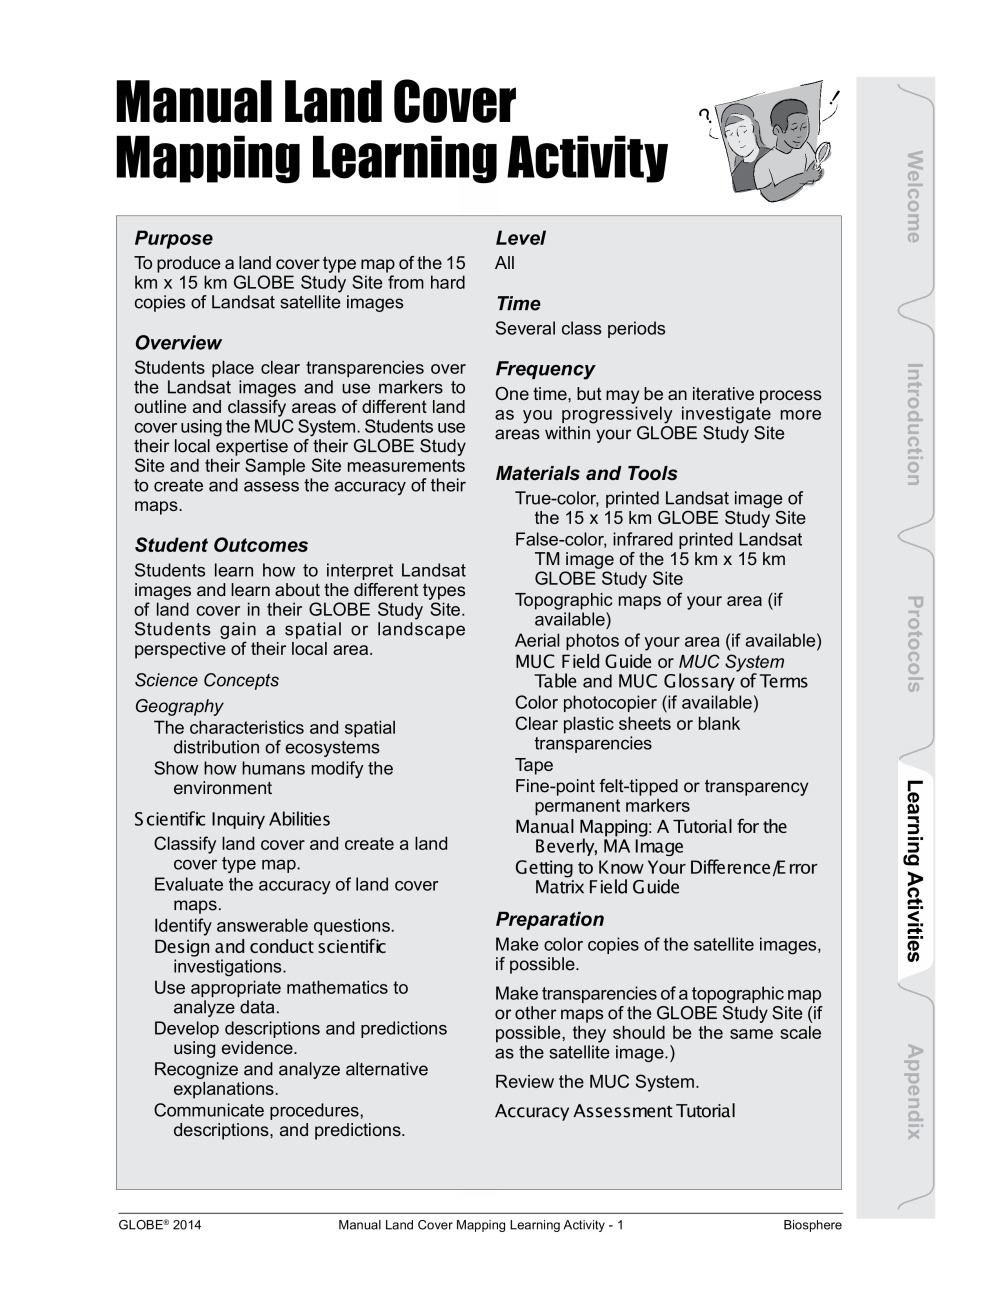 Learning Activities preview for Manual Land Cover Mapping